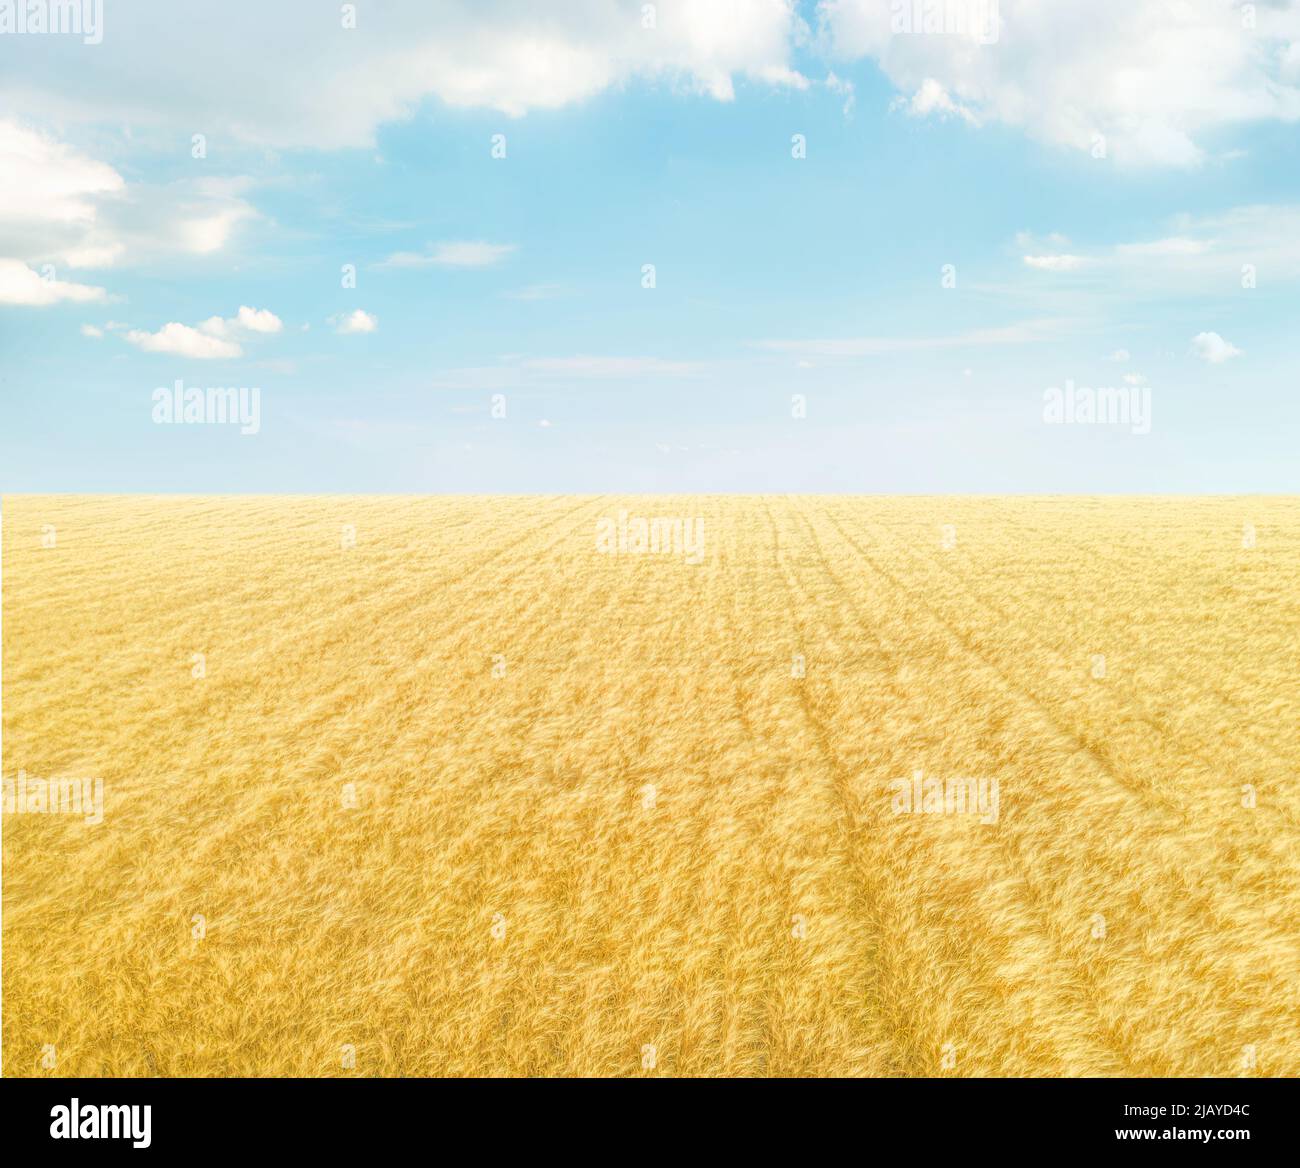 Field of golden wheat under light blue sky with clouds, minimalistic landscape background Stock Photo